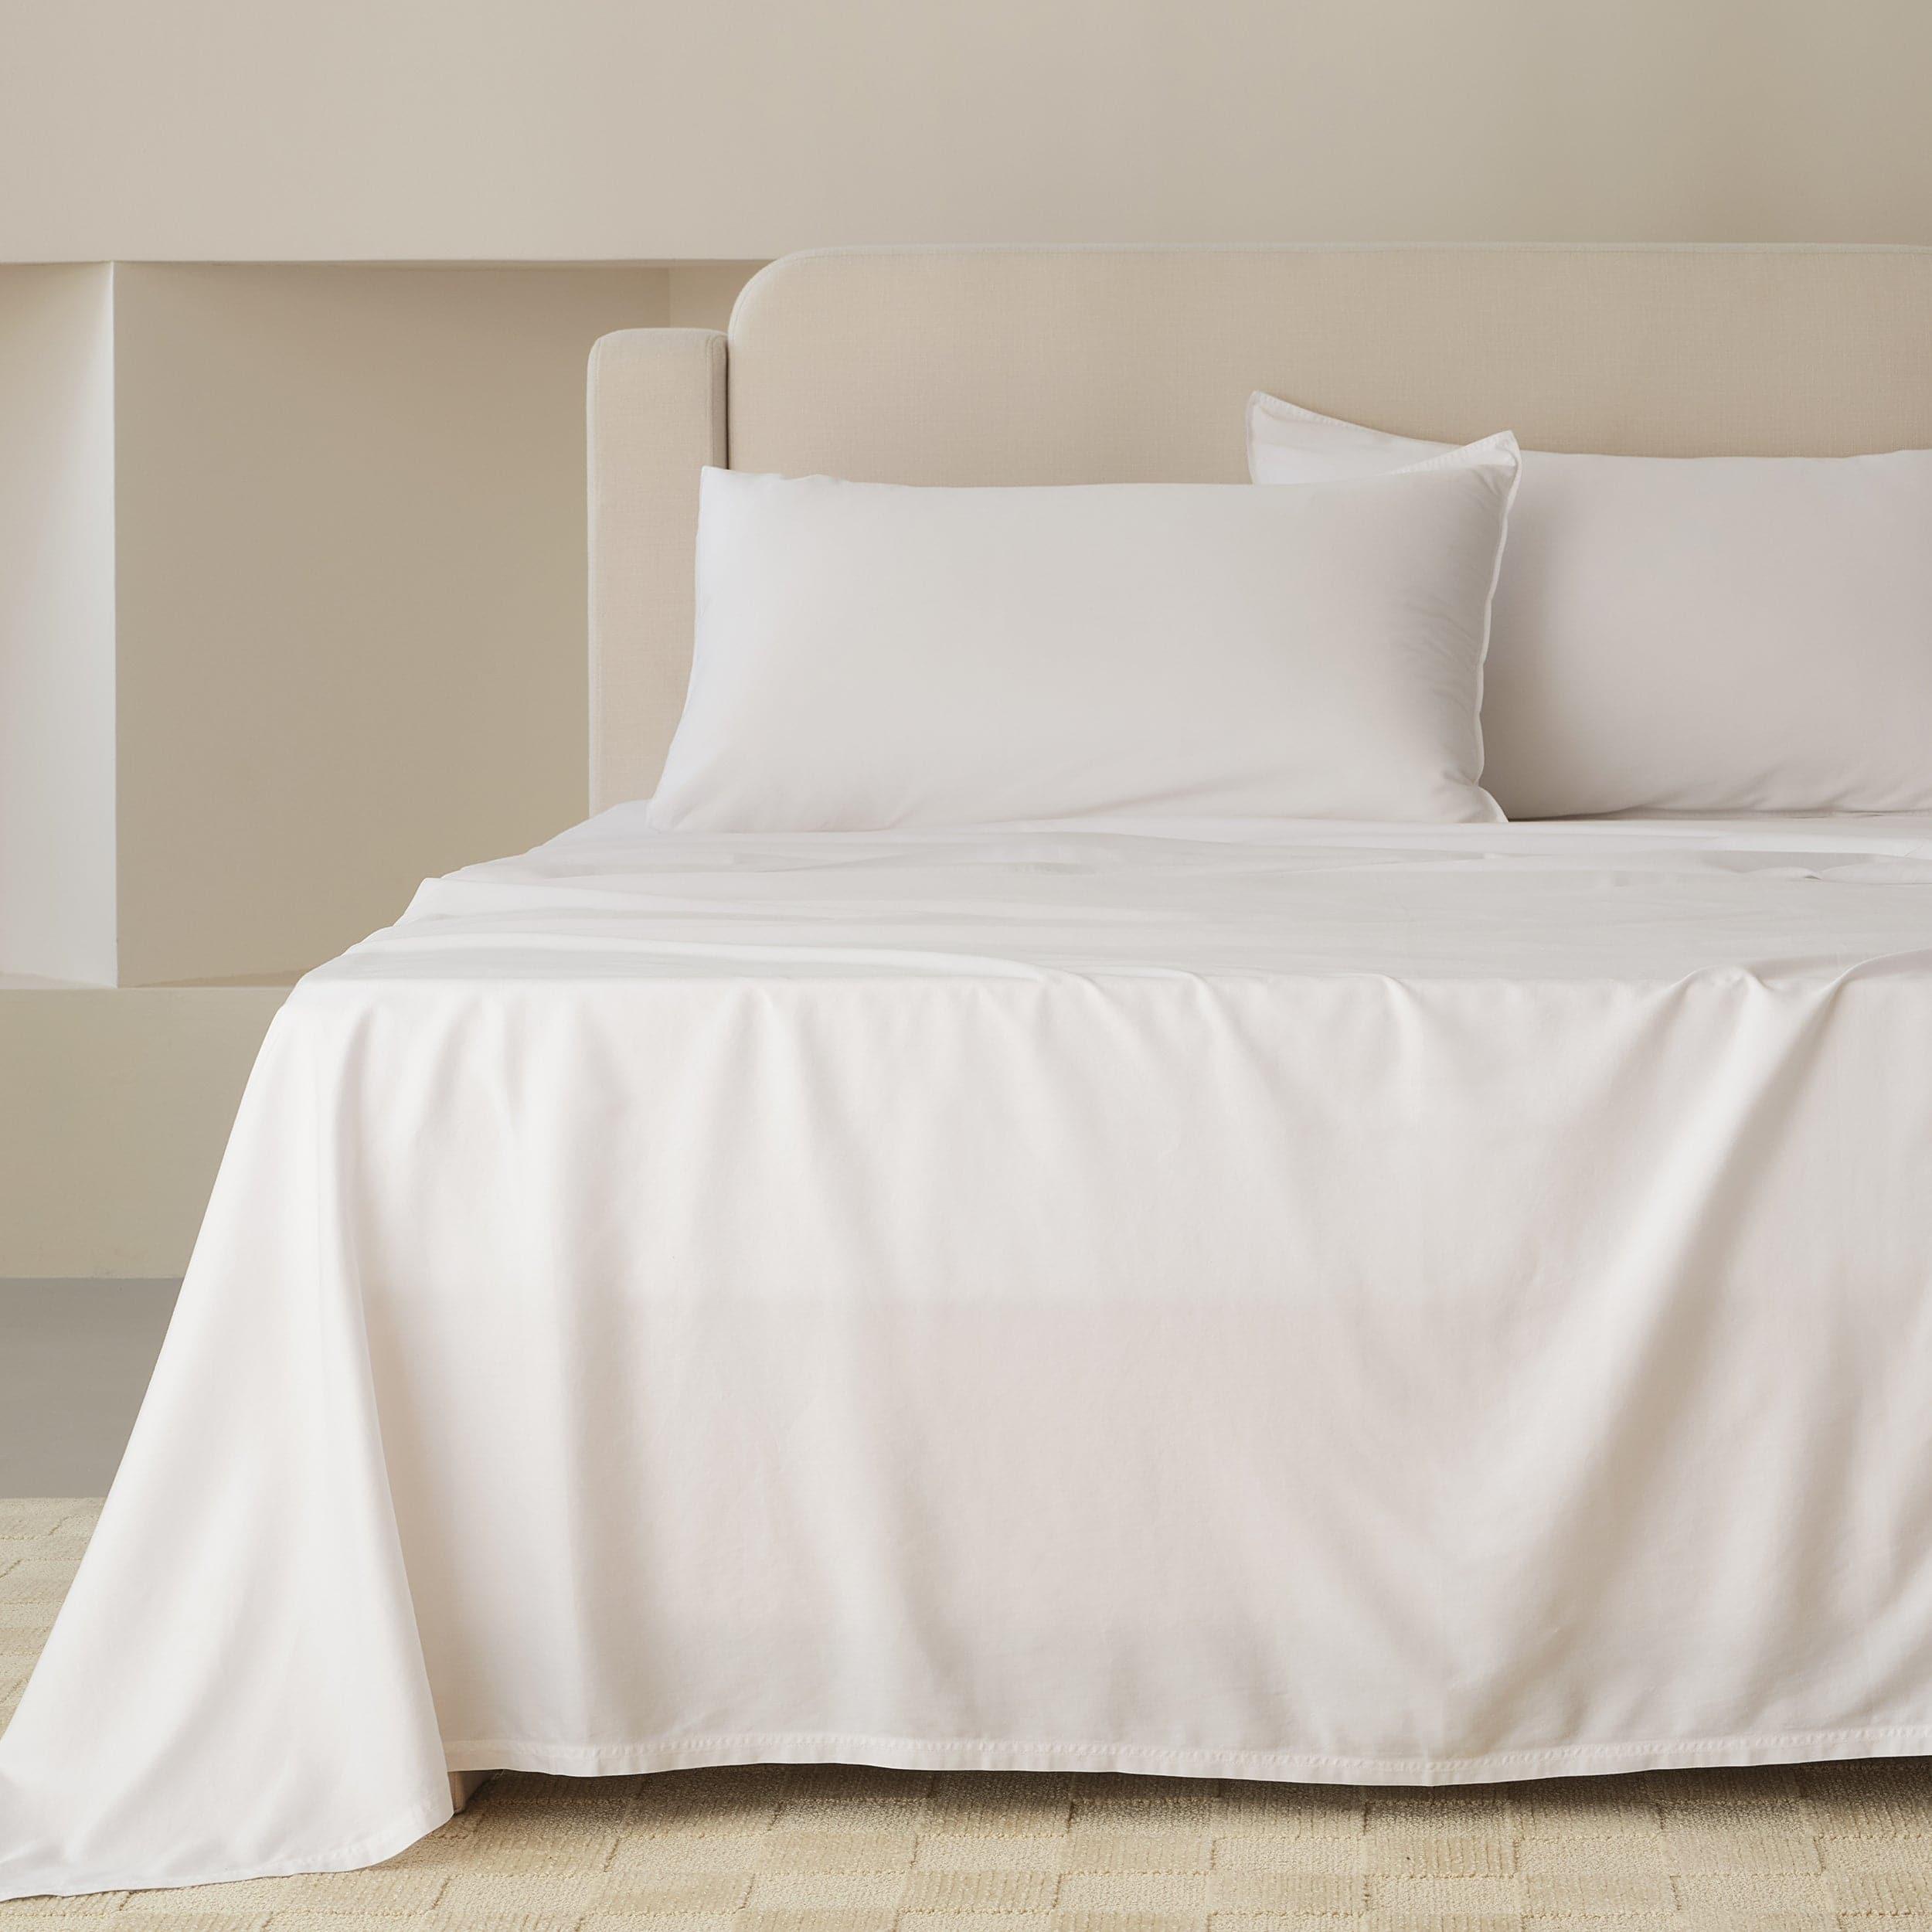 Discover the perfect combination of style and functionality with our California King sheets set.